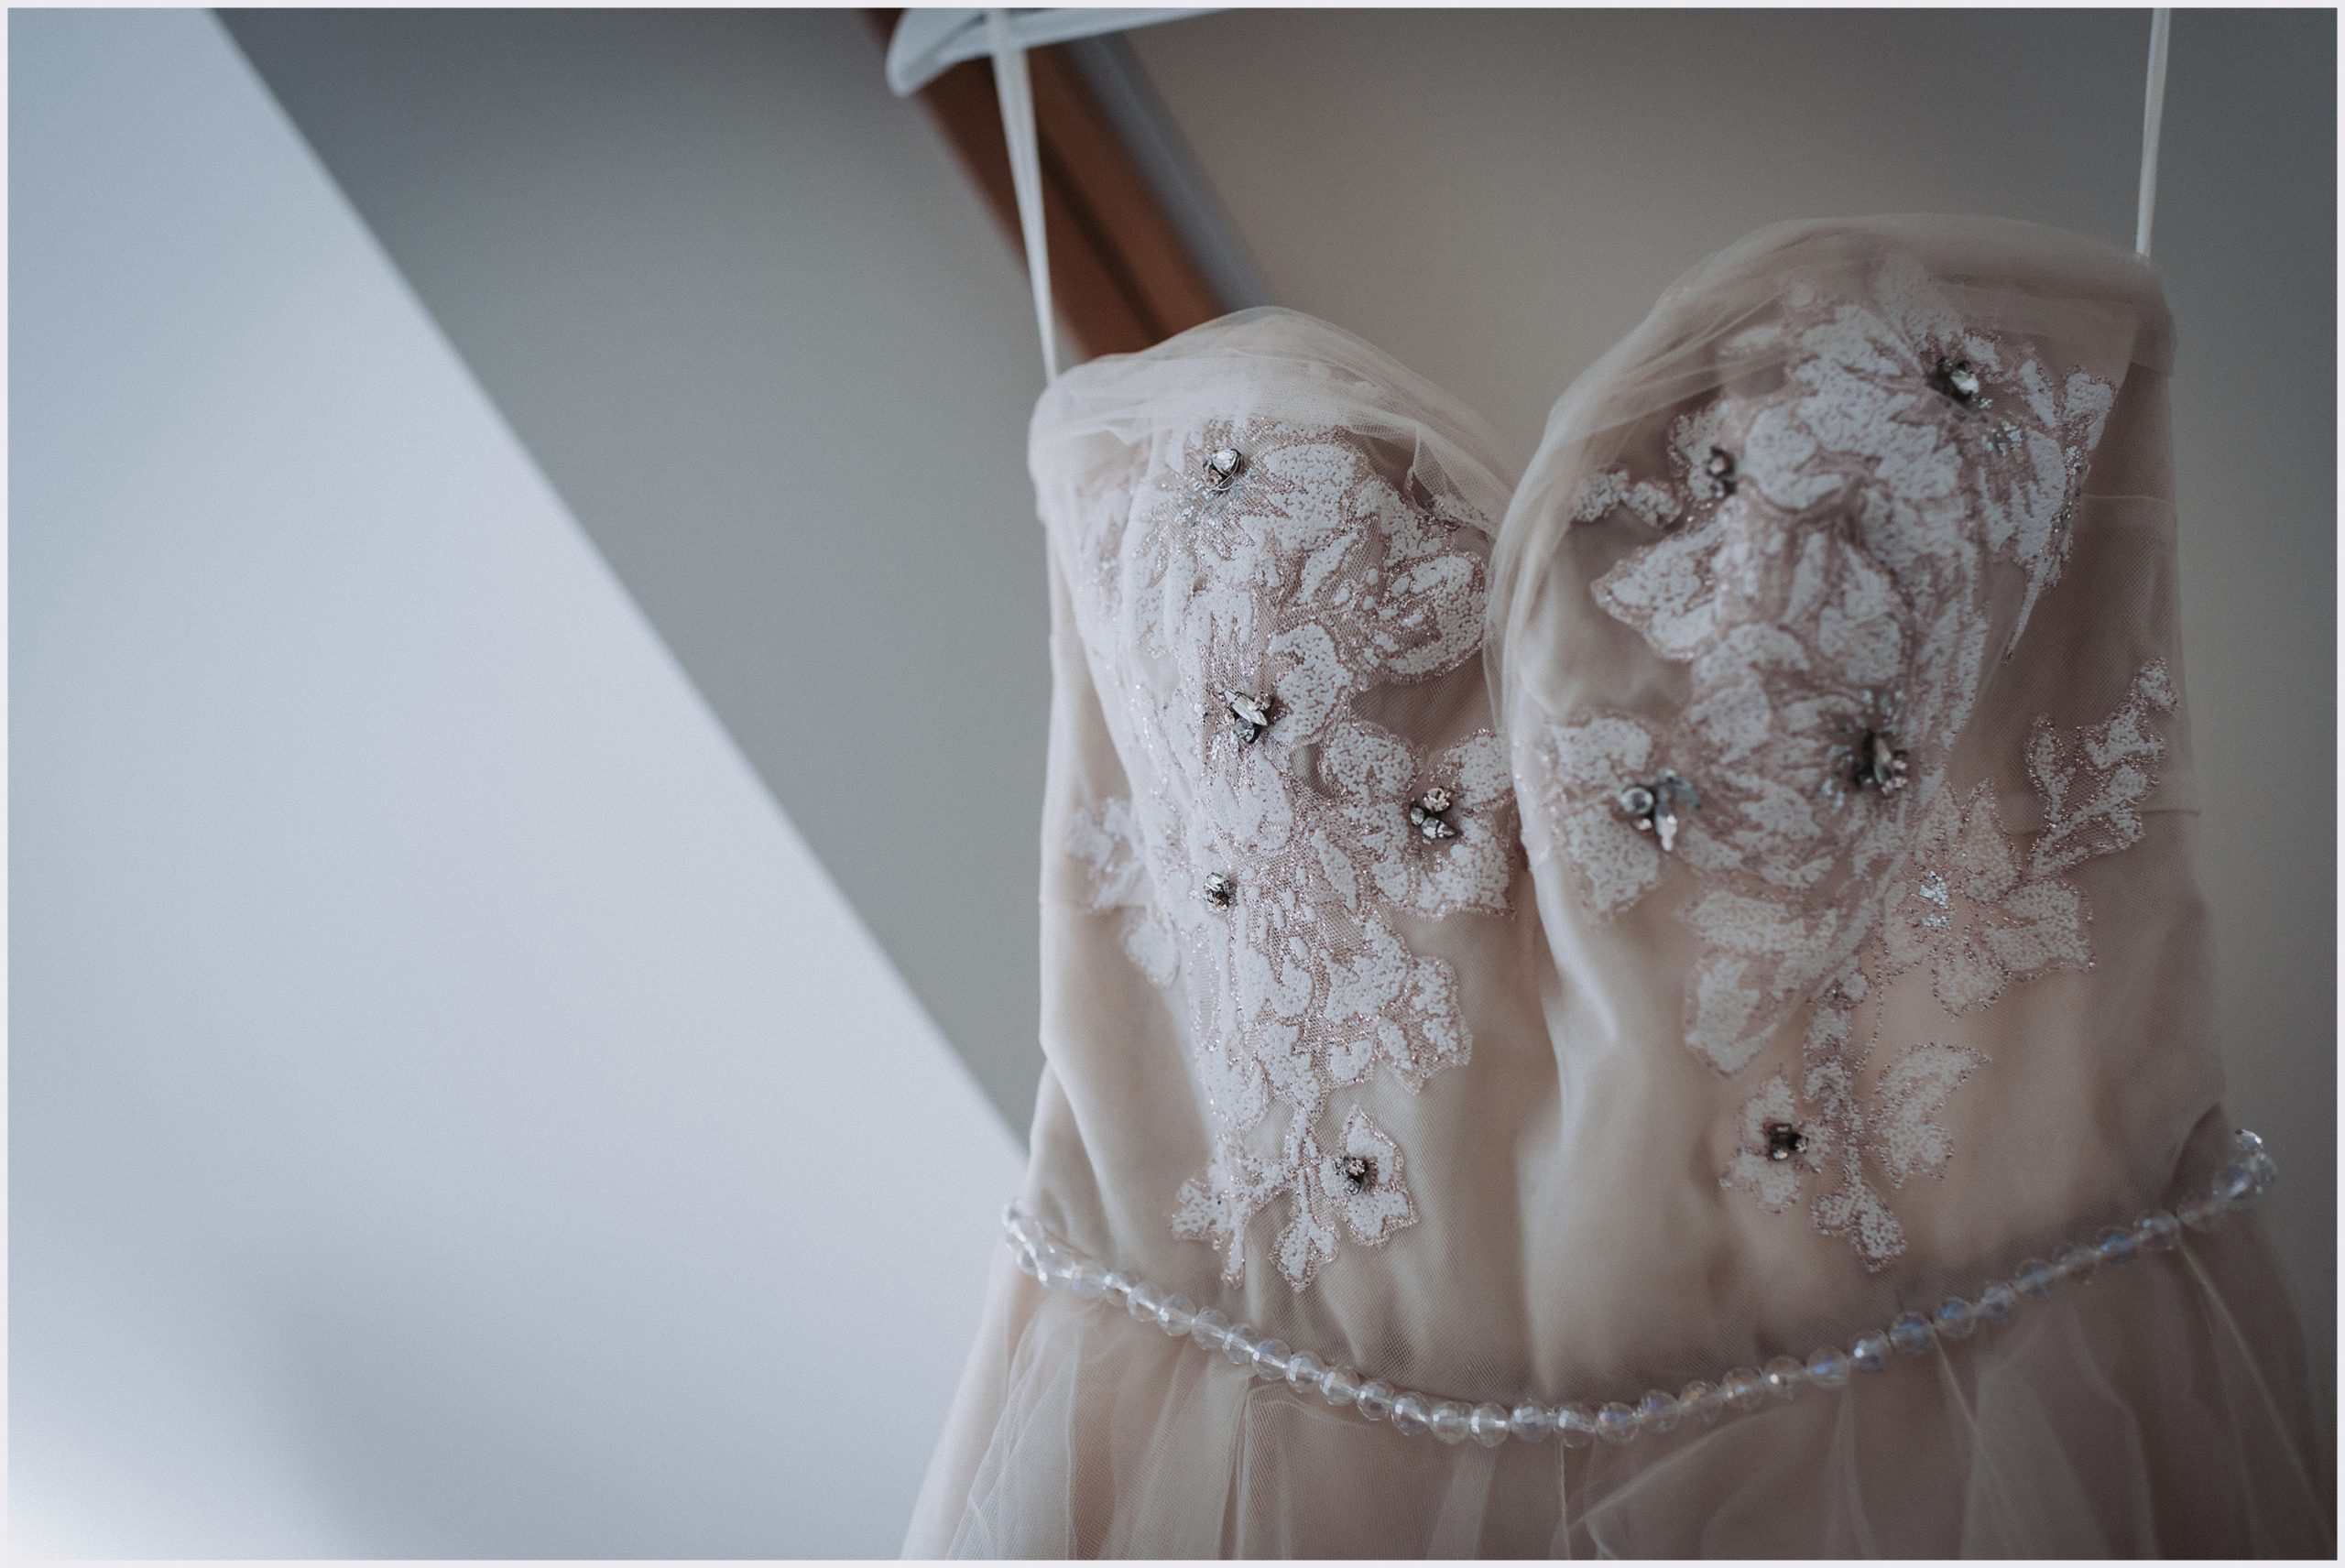 The bodice of a bride's beautiful wedding dress hanging up in the wondow of a bride's dressing room.  Image captured by Cheshire wedding photographer Helena Jayne Photography